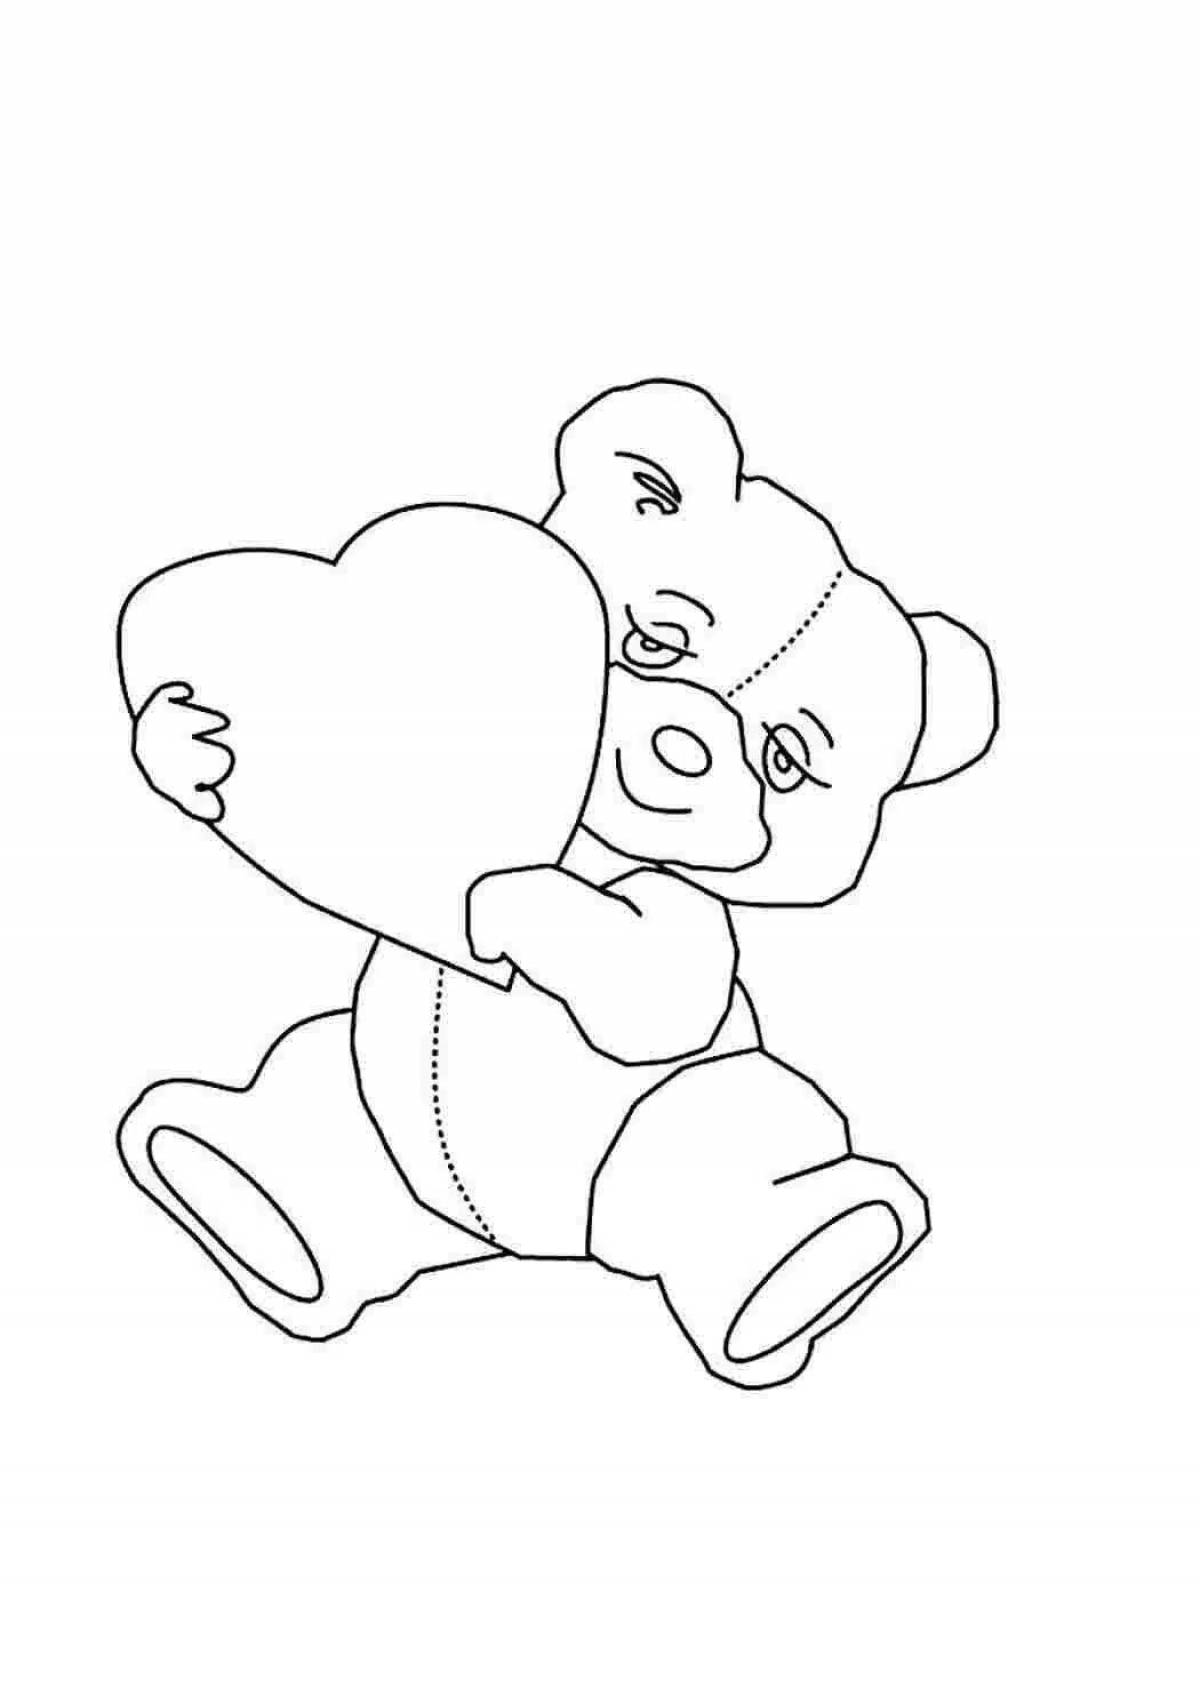 Amazing teddy bear with heart coloring book